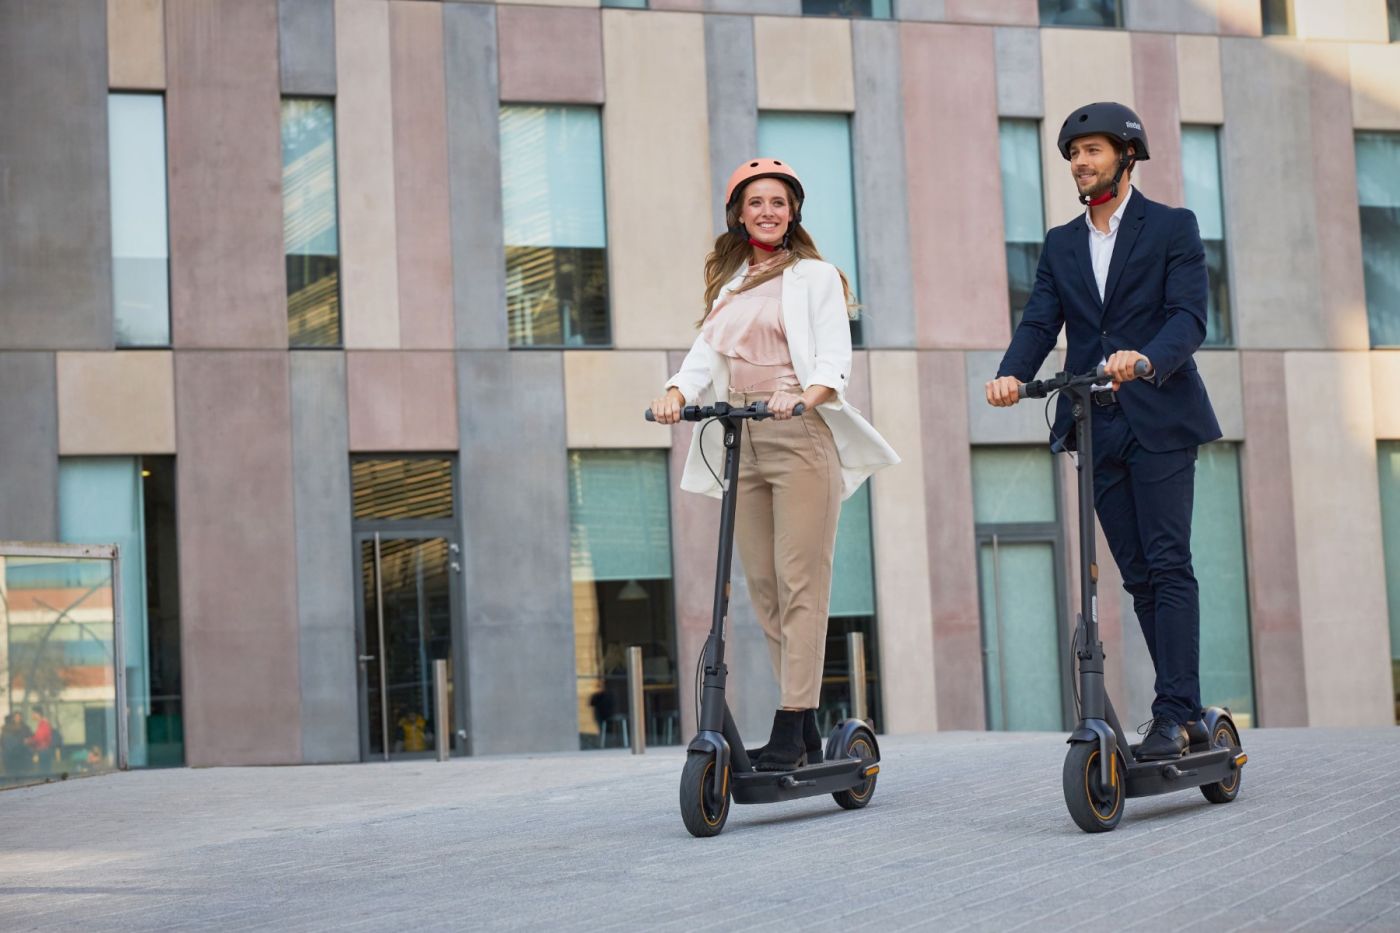 The maximum speed of the scooter is 25 km/h, which is set by law in Spain.